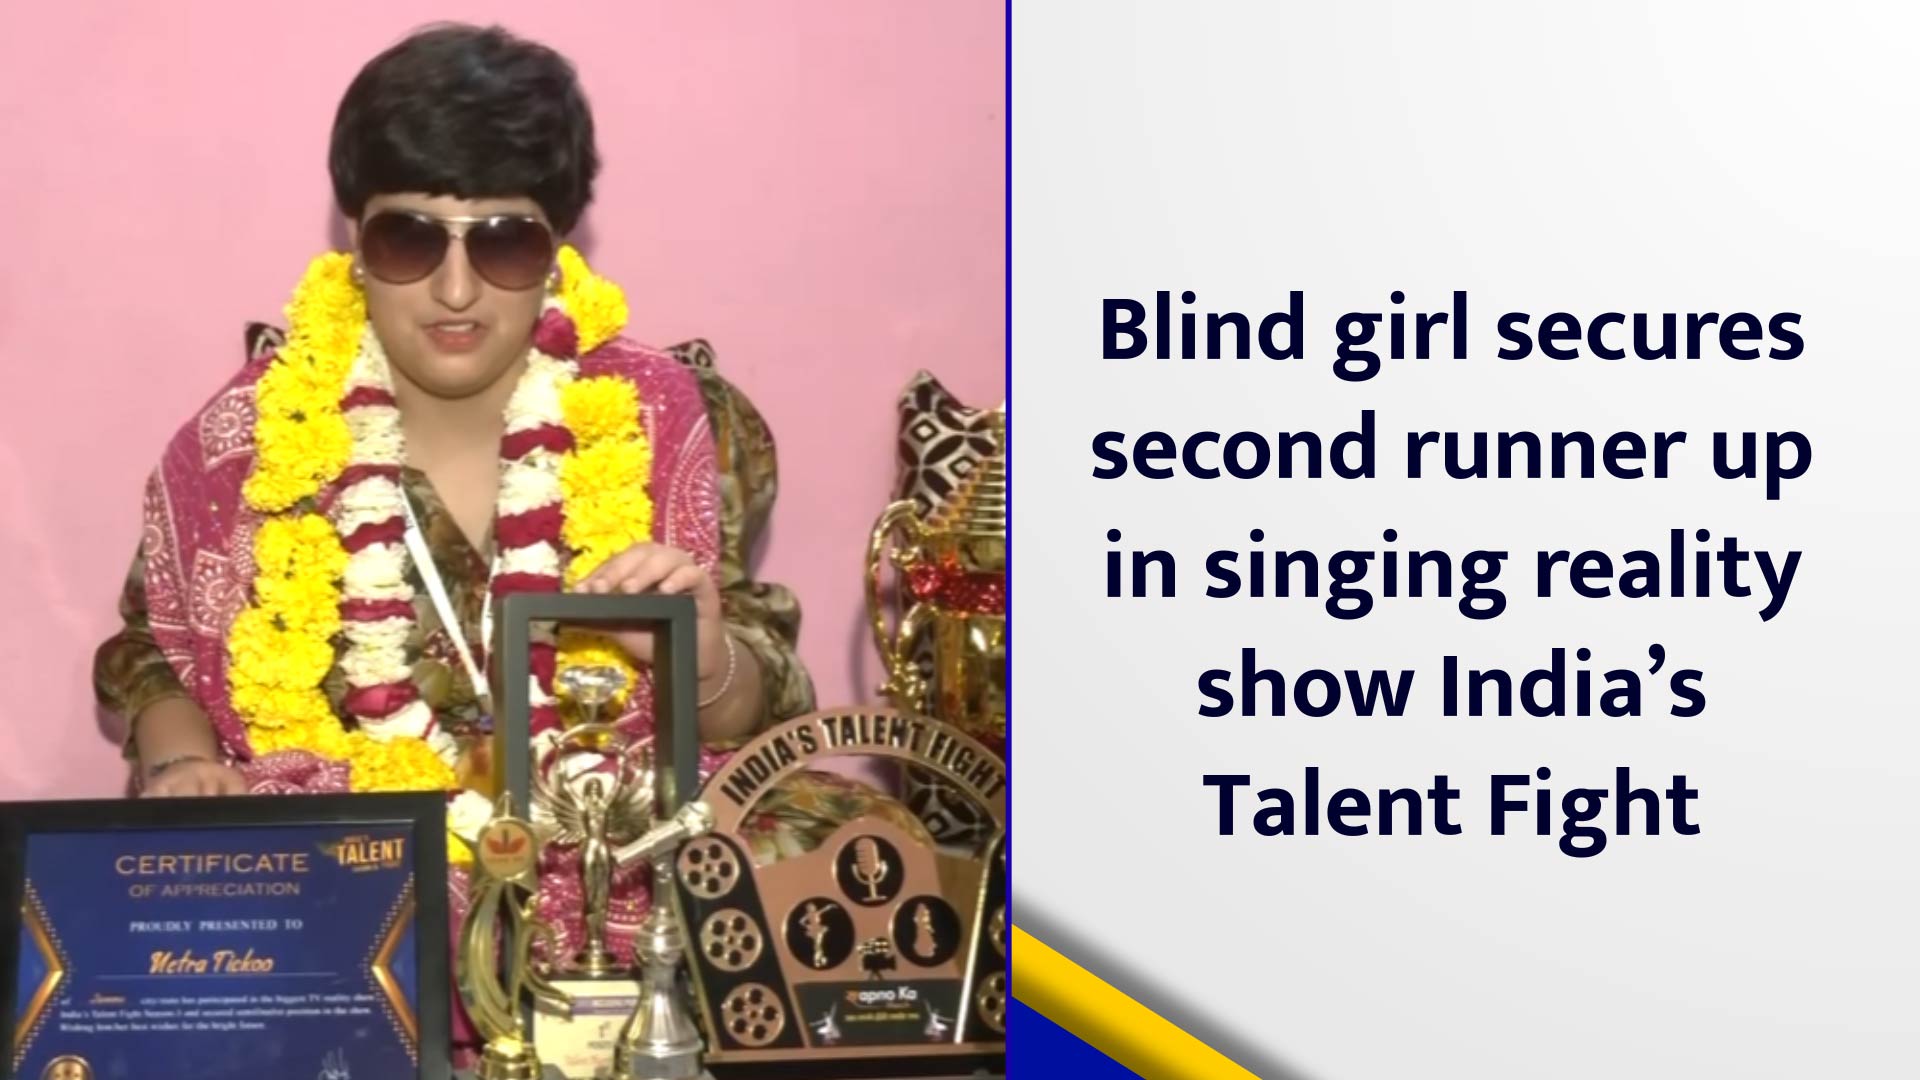 Blind girl secures second runner up in singing reality show Indias Talent Fight